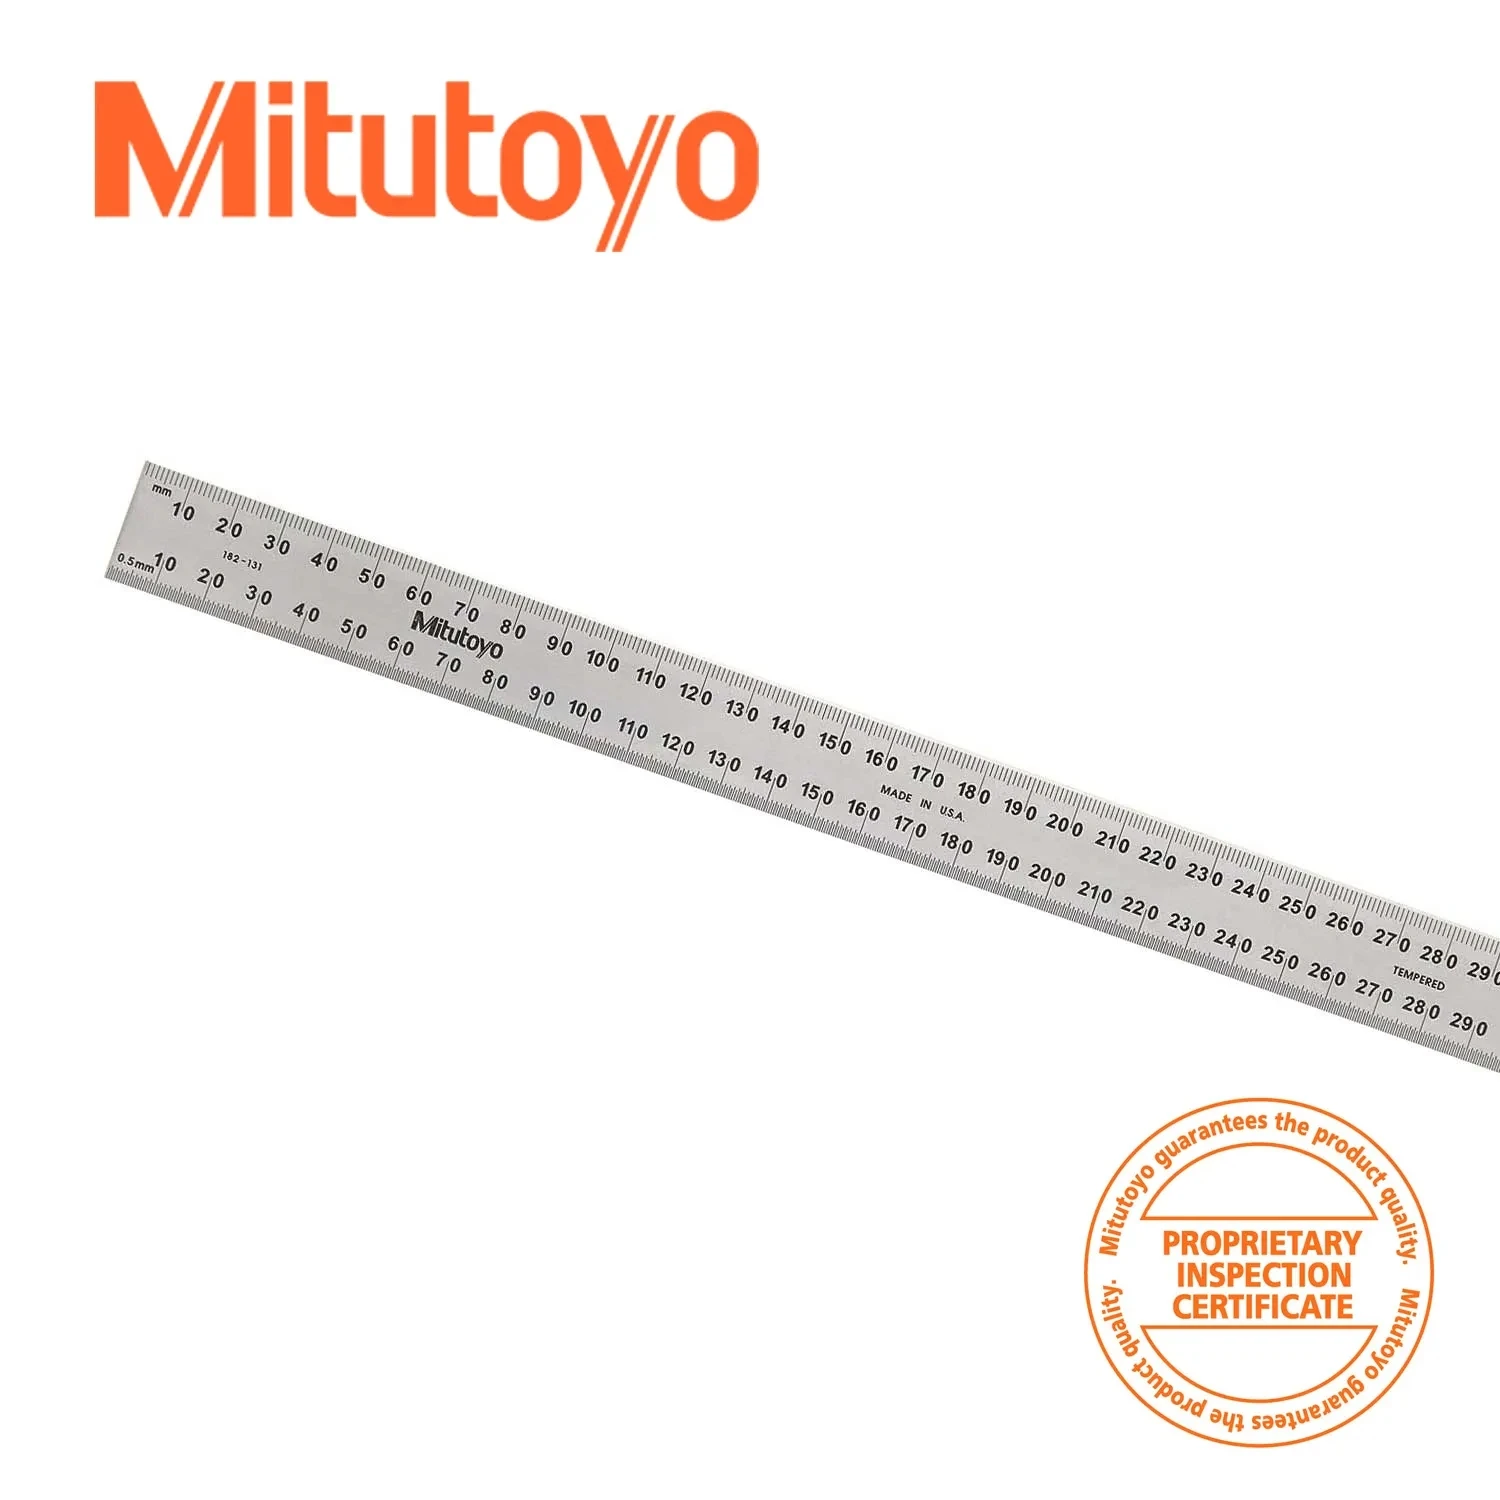 

Mitutoyo 182-131, 300mm Tempered Stainless Steel Rule, Wide Rigid Ruler Graduation 1mm/0.5mm on both faces, Satin Chrome Finish